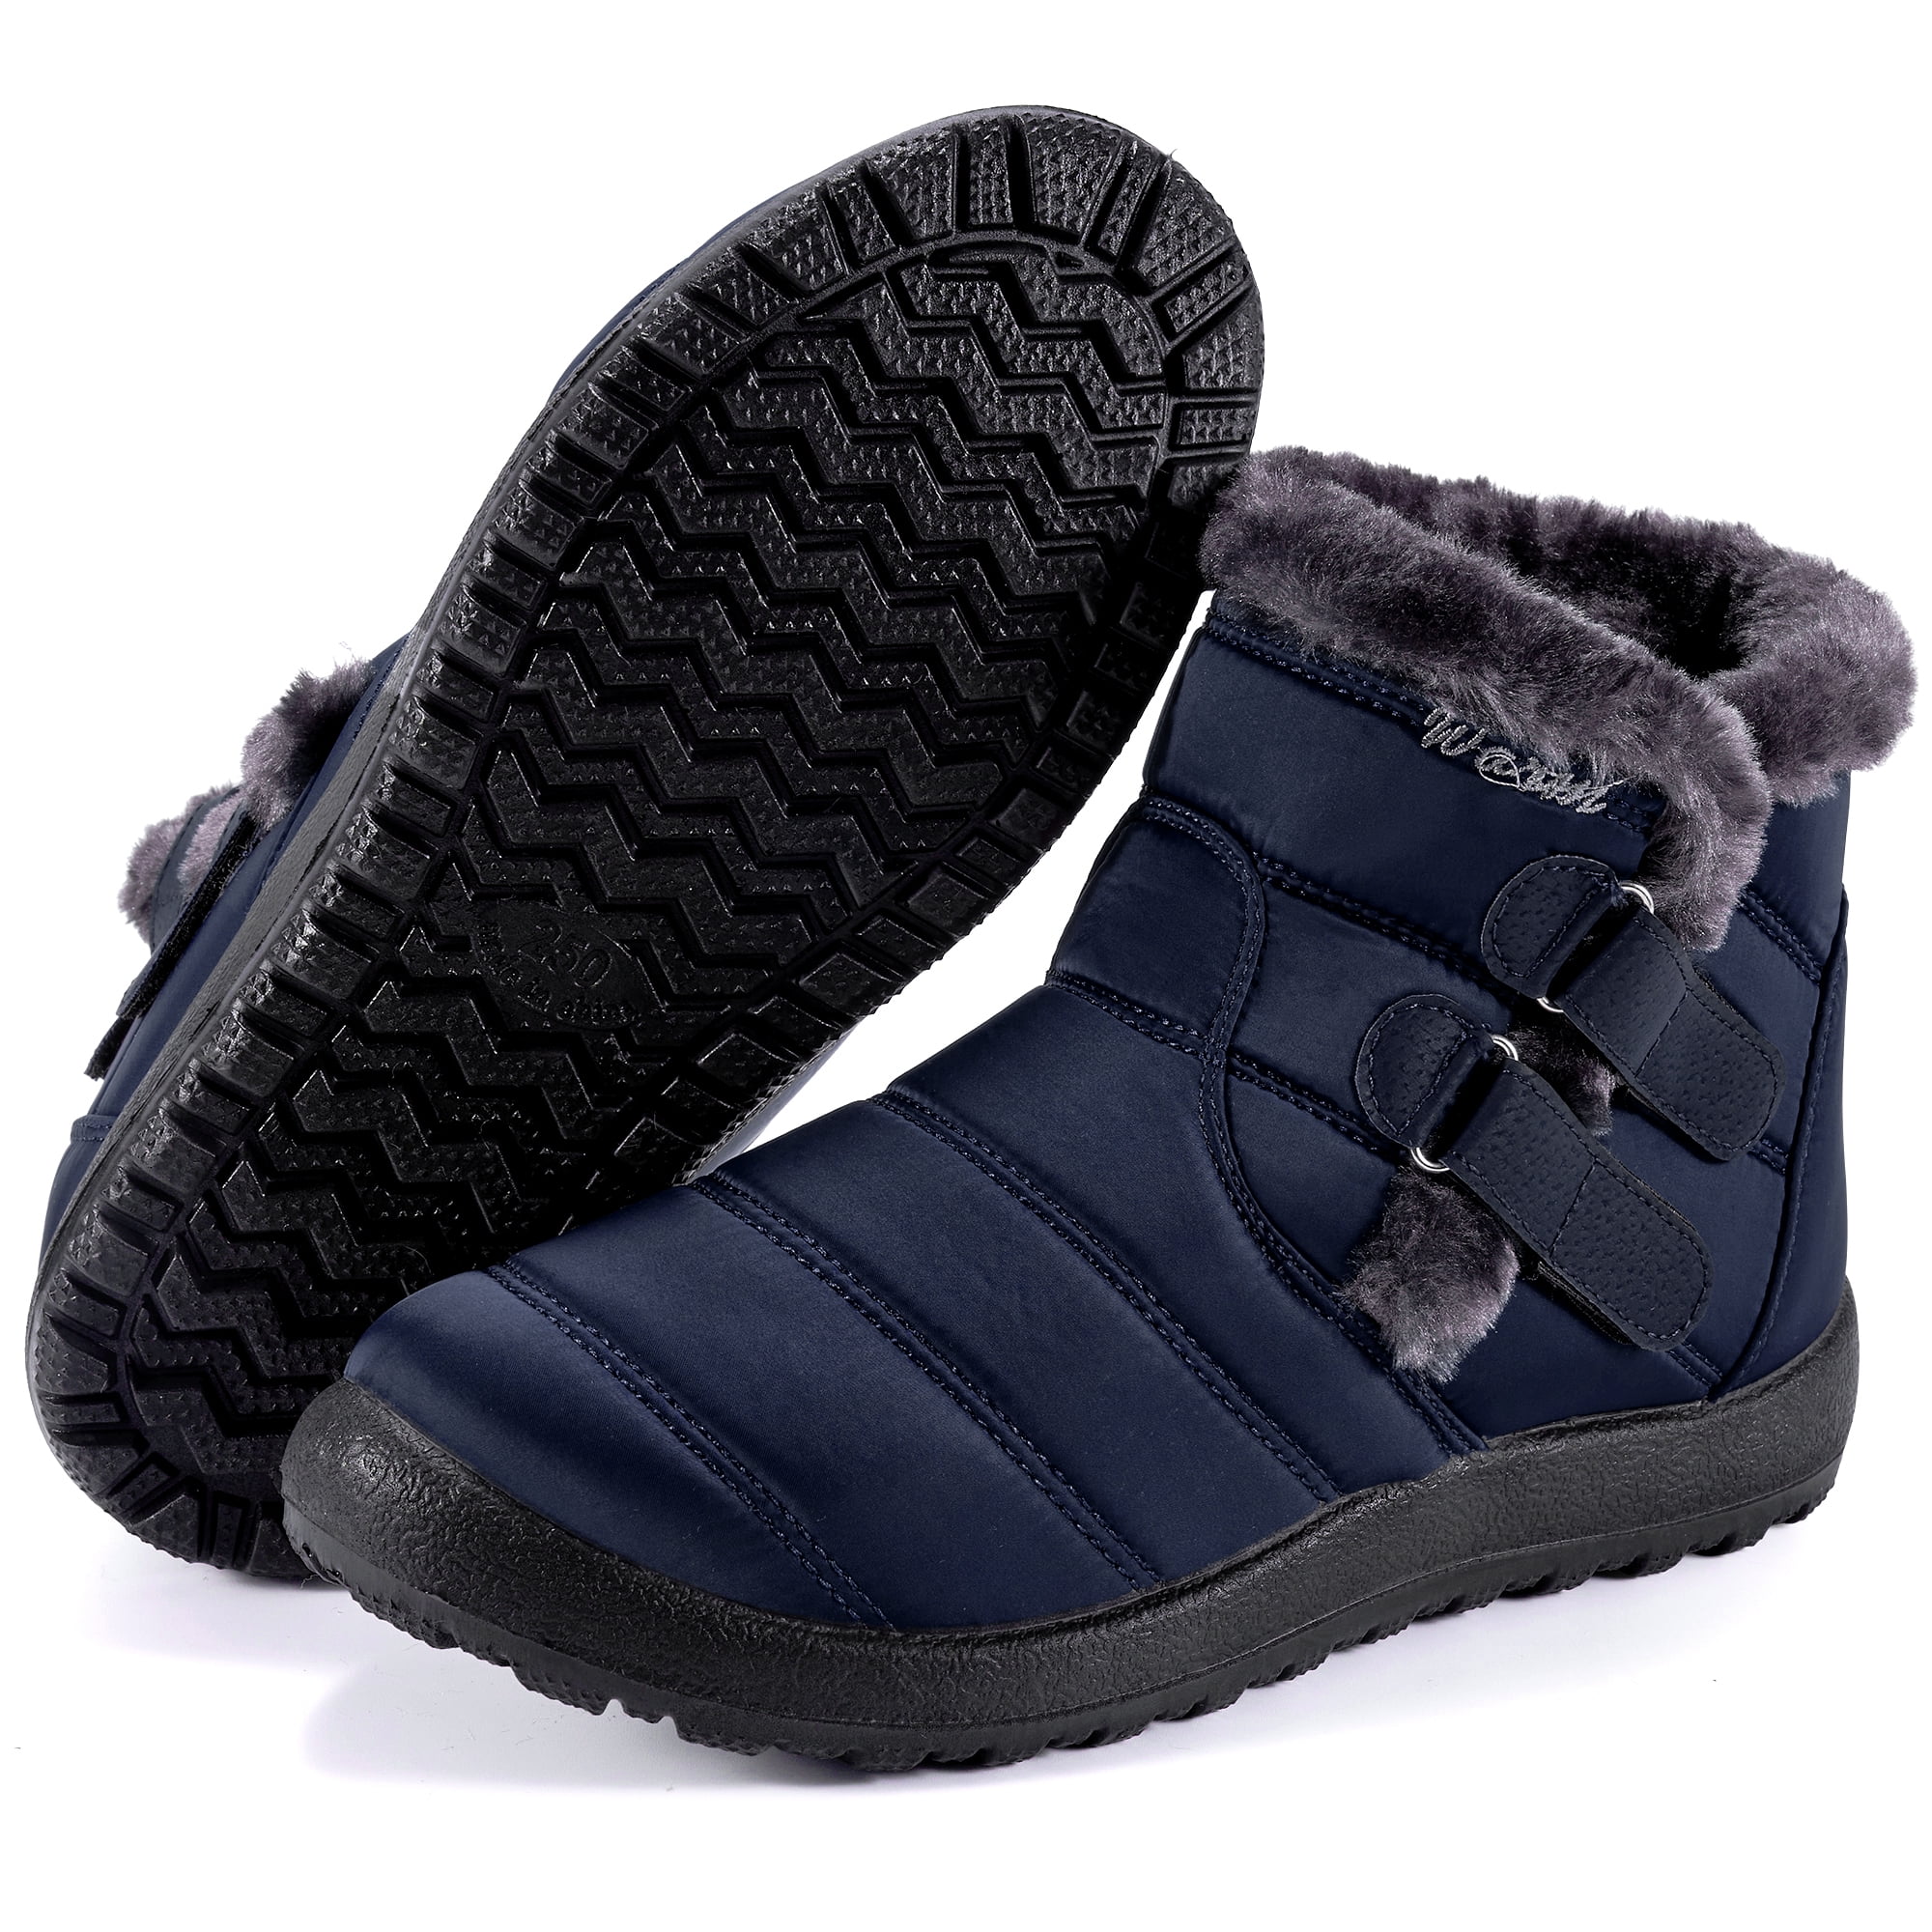 gracosy Snow Boots for Women Warm Ankle Boots Waterproof Outdoor Slip On Fur Lined Winter Short Booties Anti-Slip Comfort Zipper Large Size Shoes 